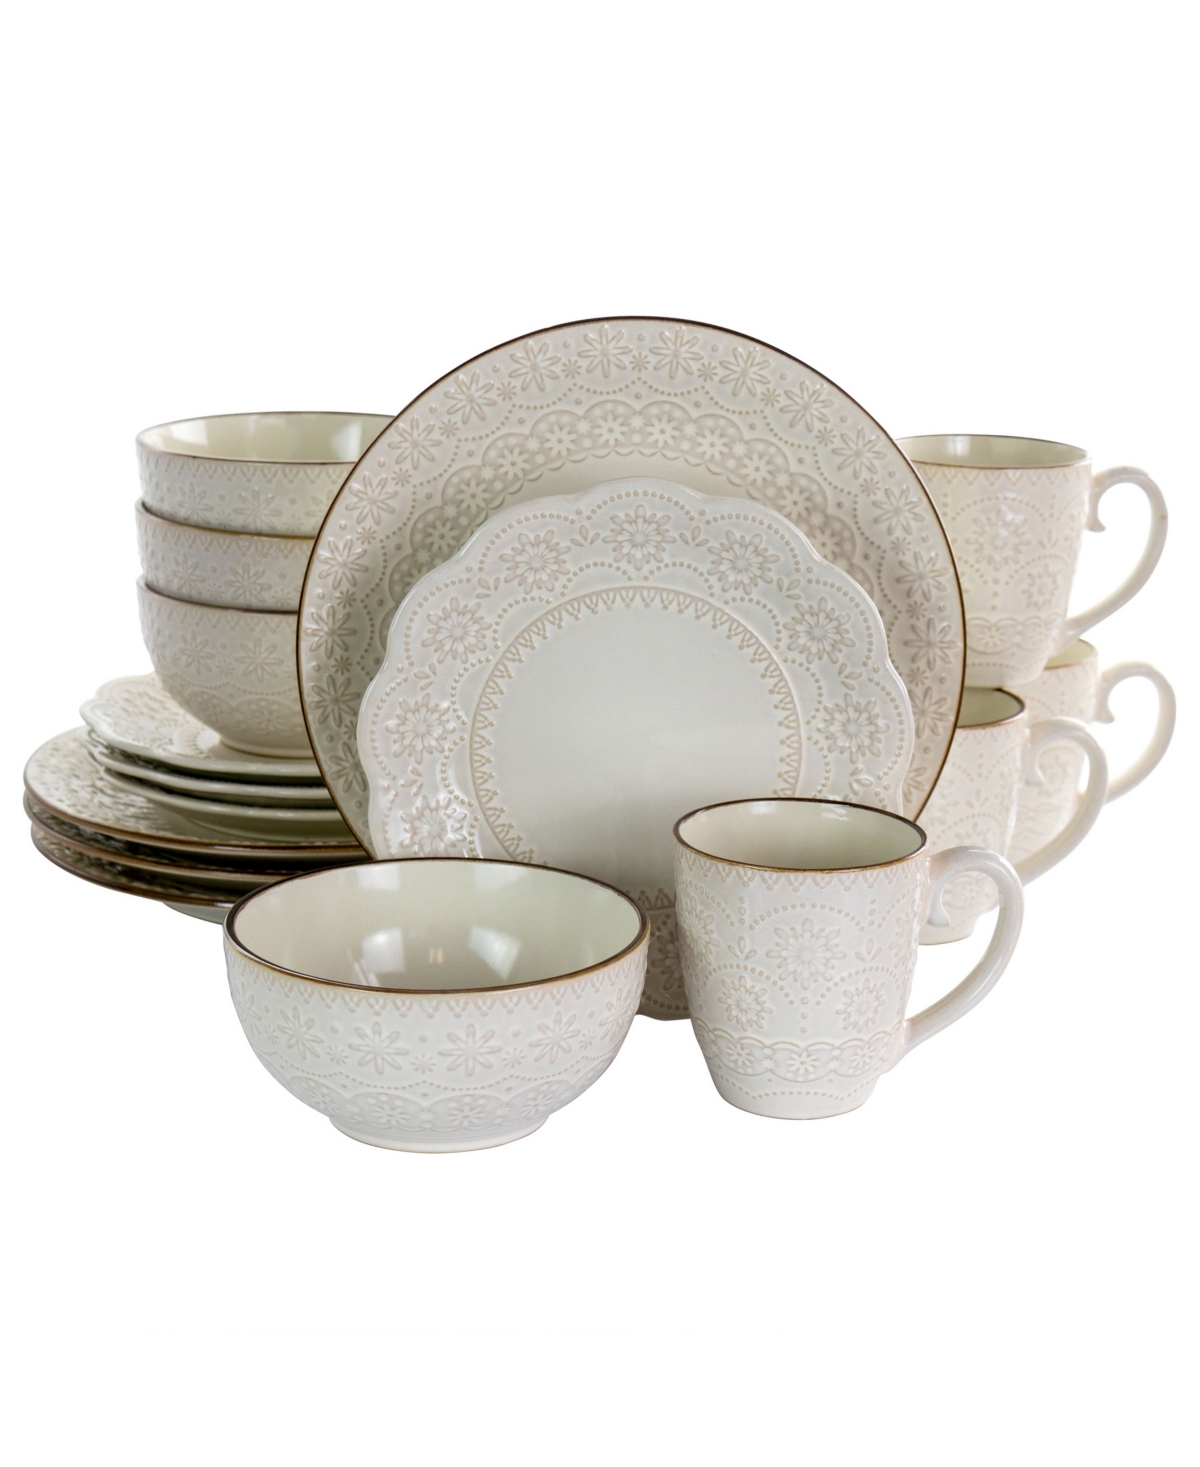 Sophie Embossed Scalloped 16 Piece Stoneware Dinnerware Set, Service for 4 - Ivory